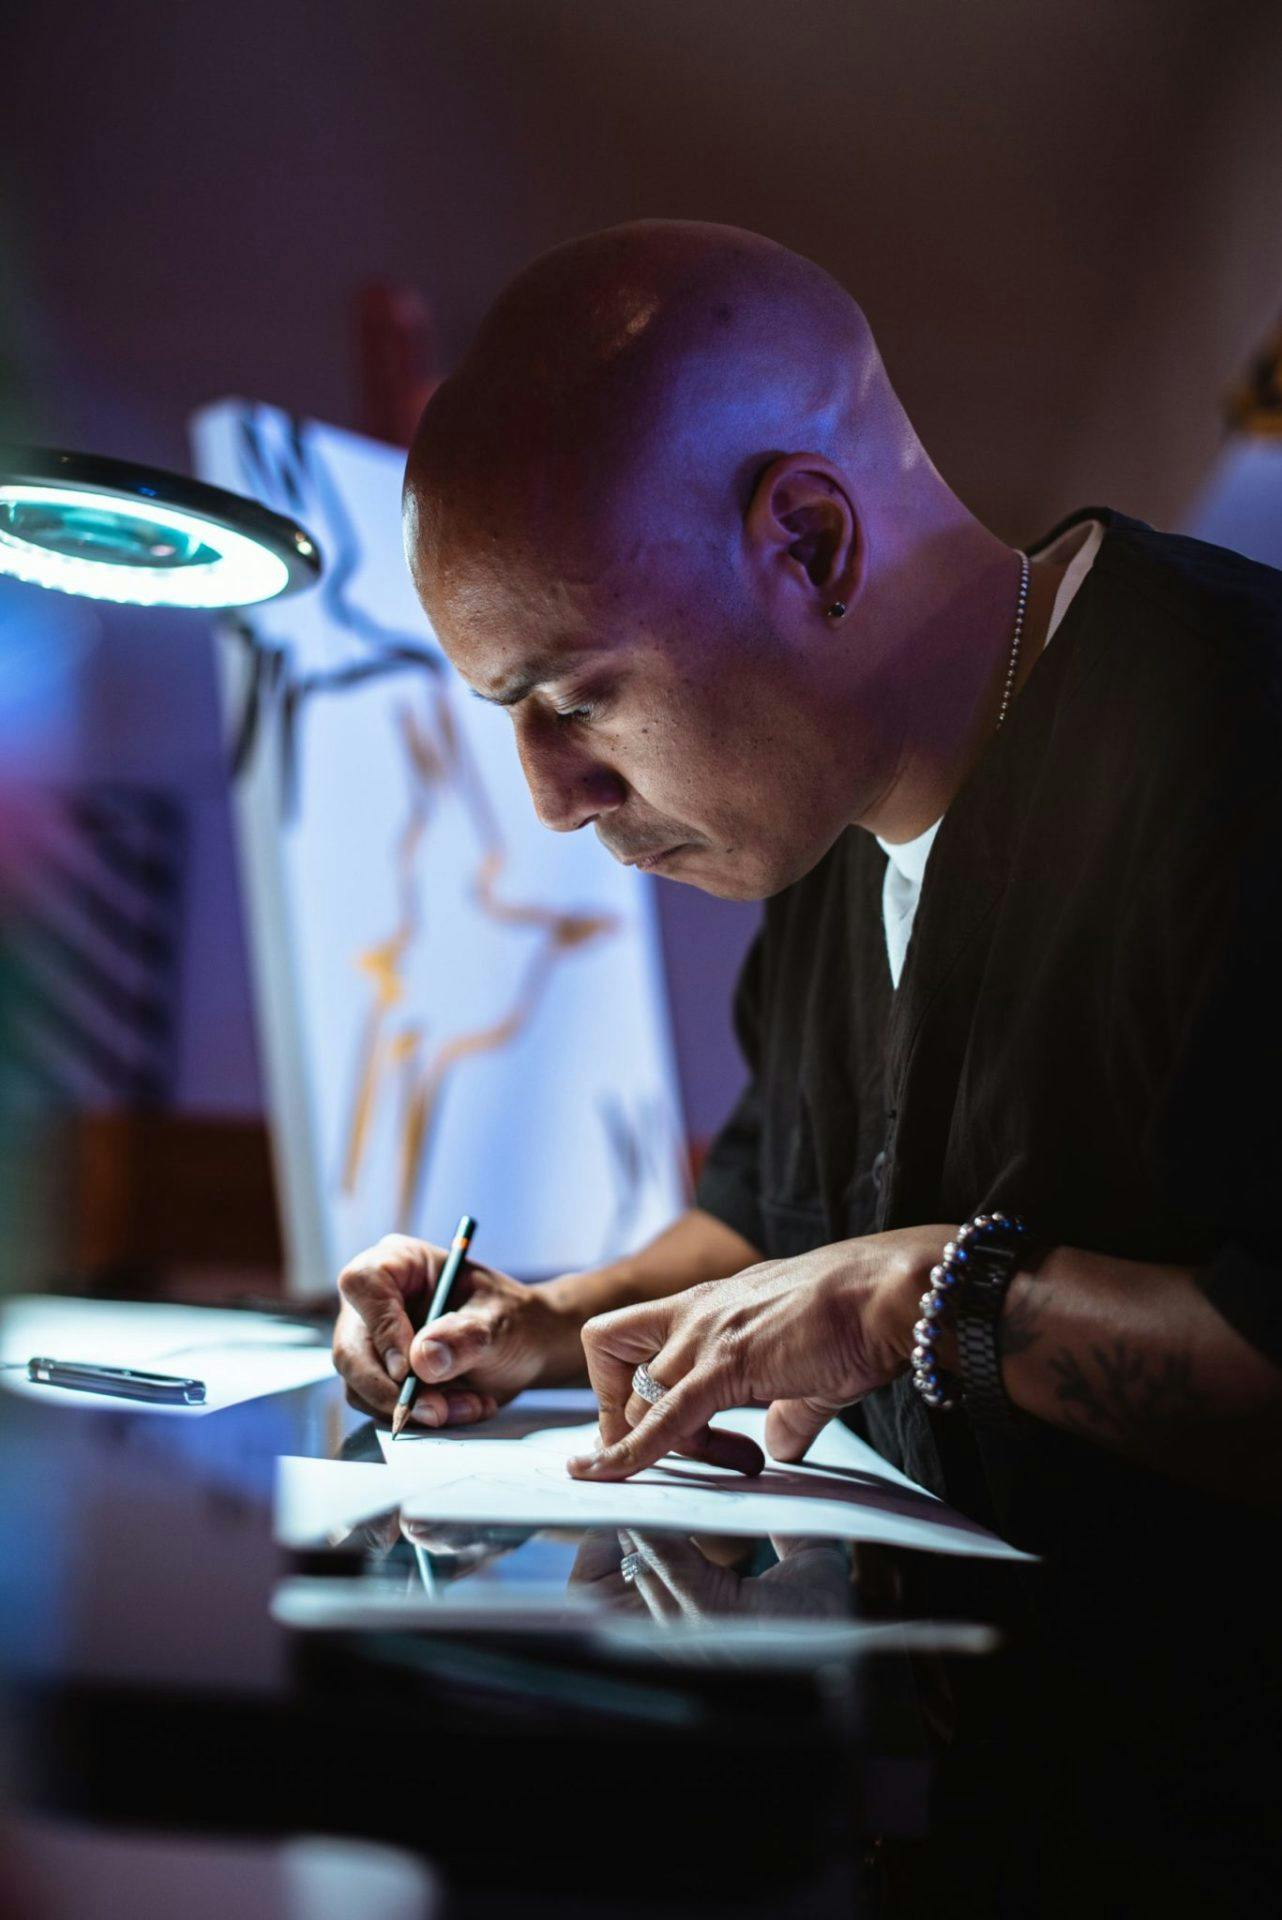 man focus on his drawing in a dim light room